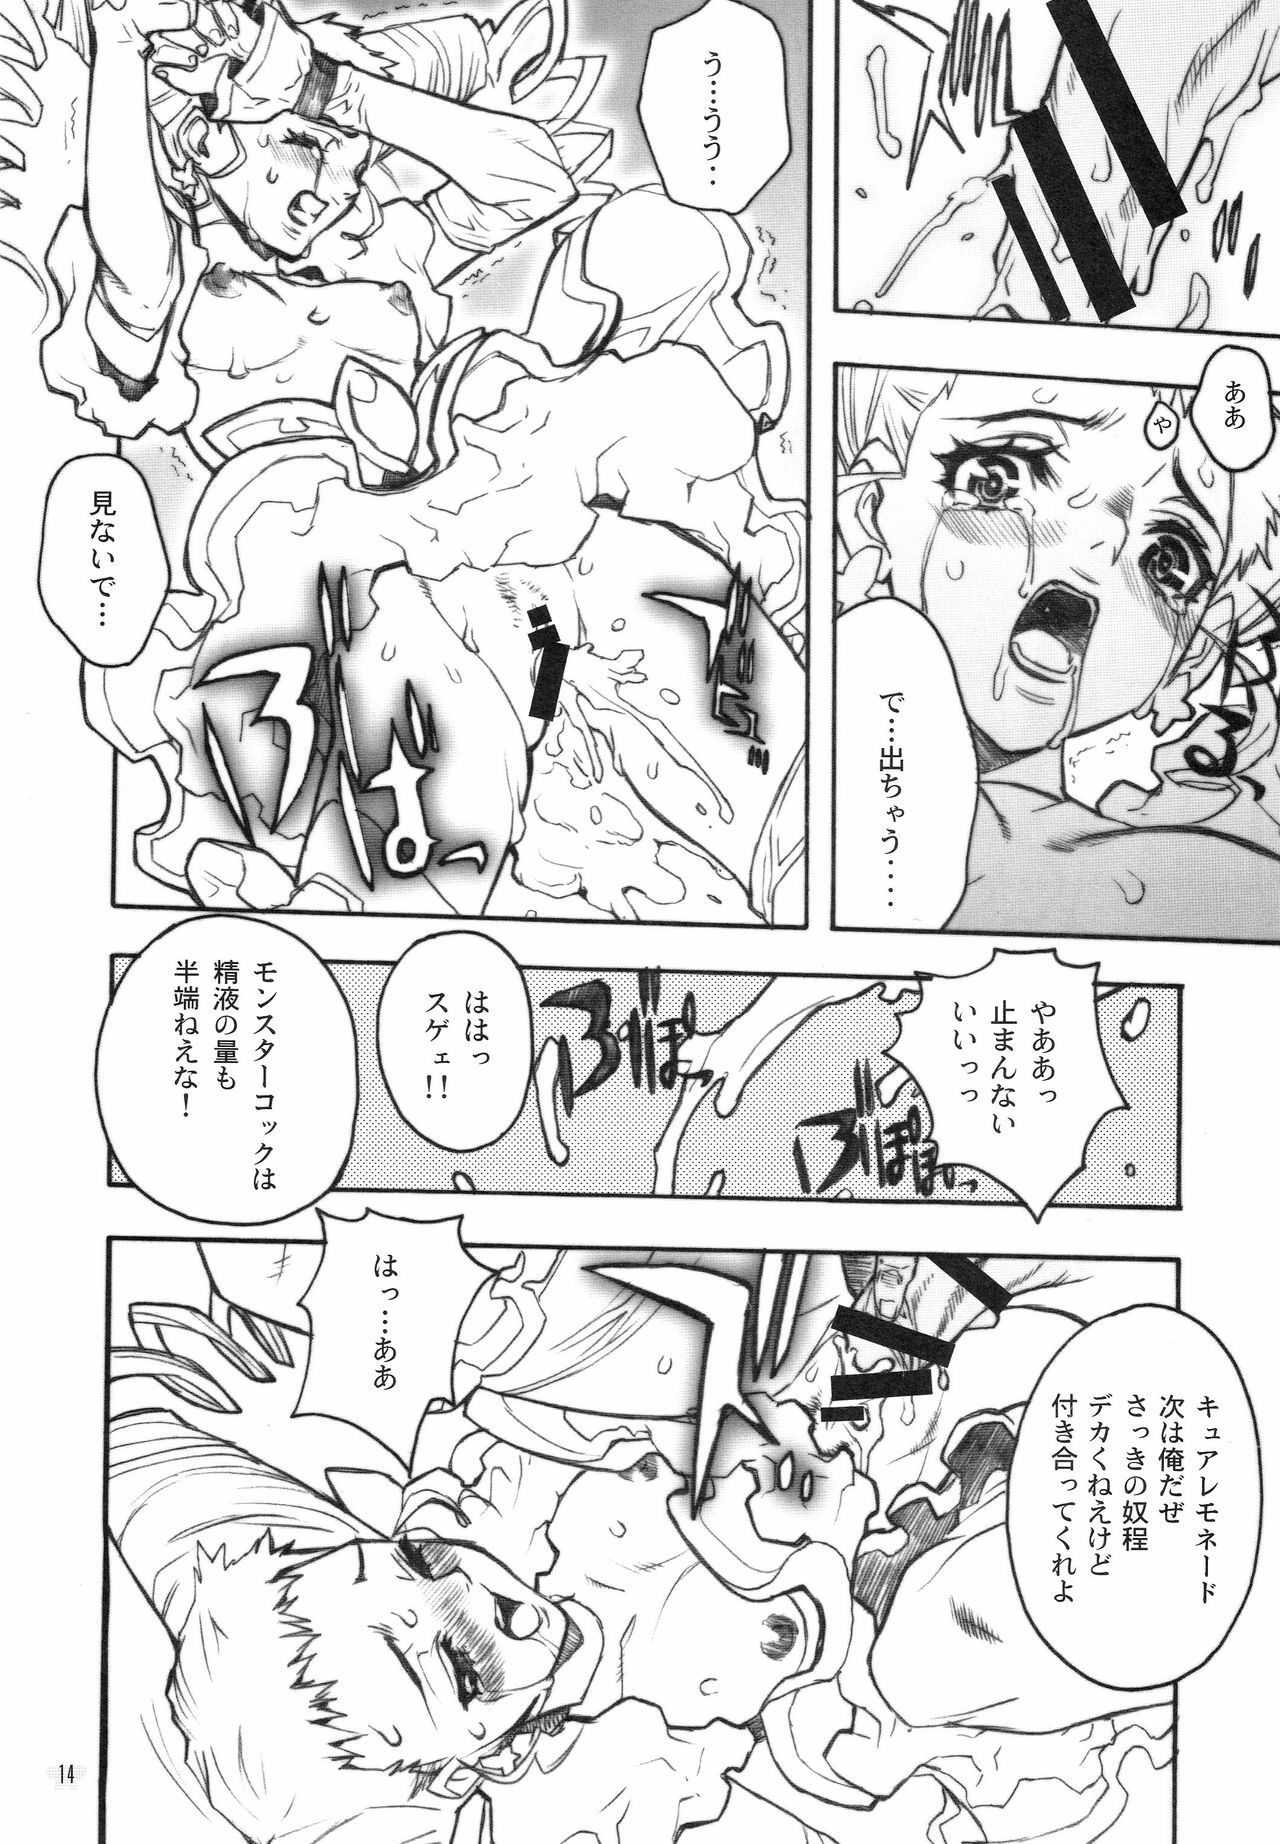 [Piggstar (Nagoya Shachihachi)] Candy Vol.2 taste yellow (Yes! Precure 5) page 11 full